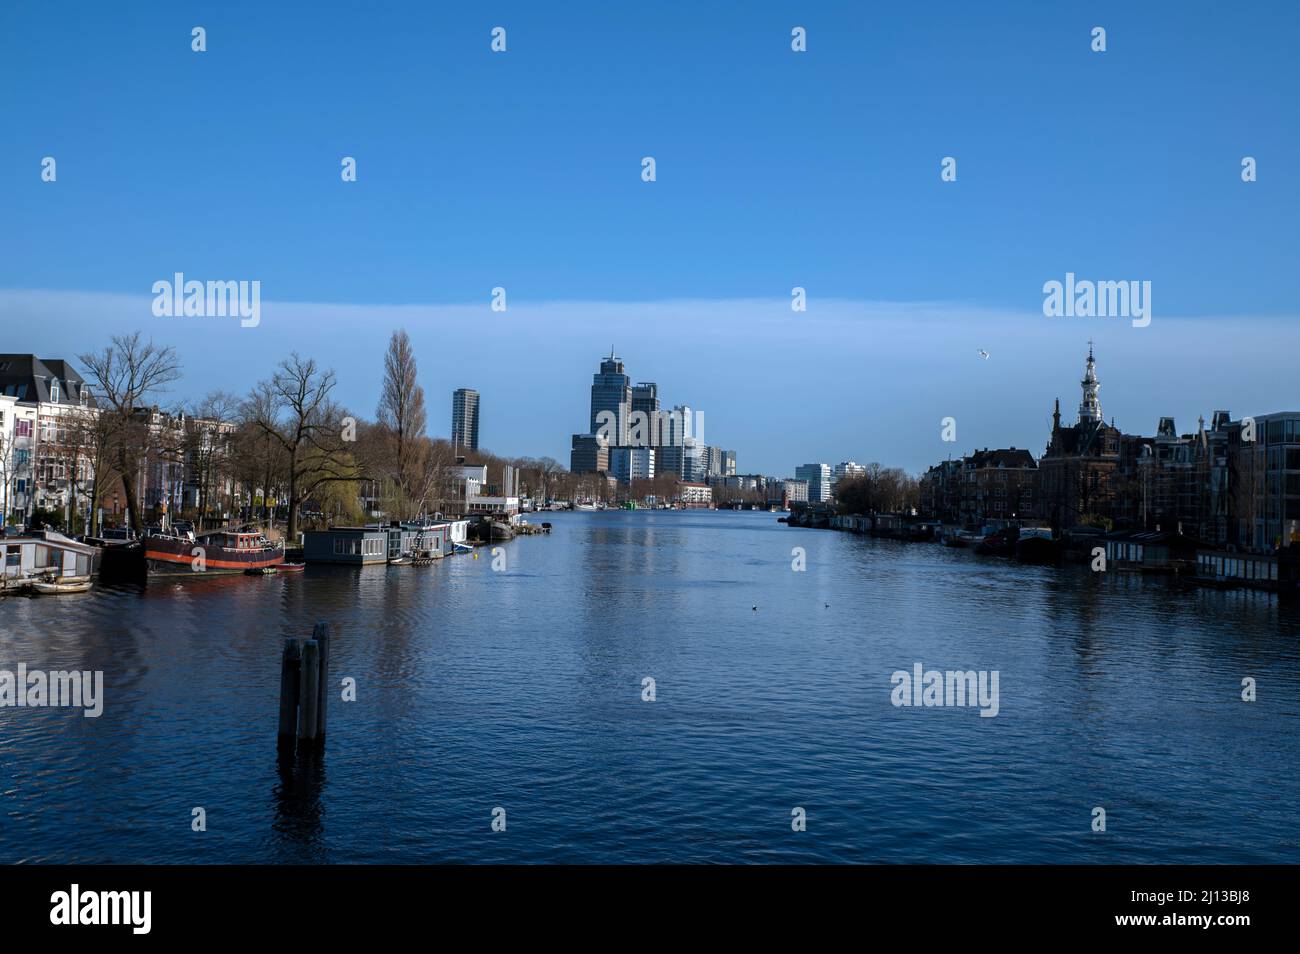 View From The Nieuwe Amstelbrug Bridge At The Amstelriver Amsterdam The Netherlands 17-3-2022 Stock Photo